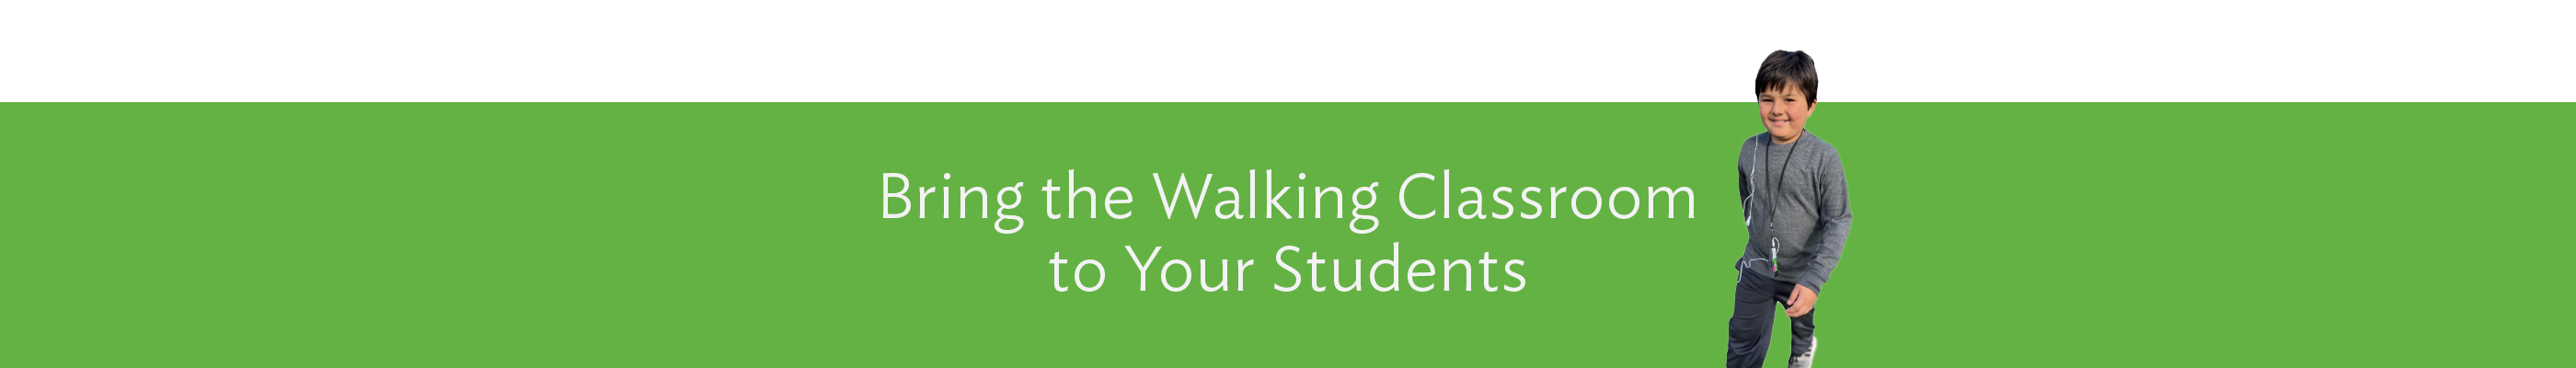 Improve health and learning with The Walking Classroom